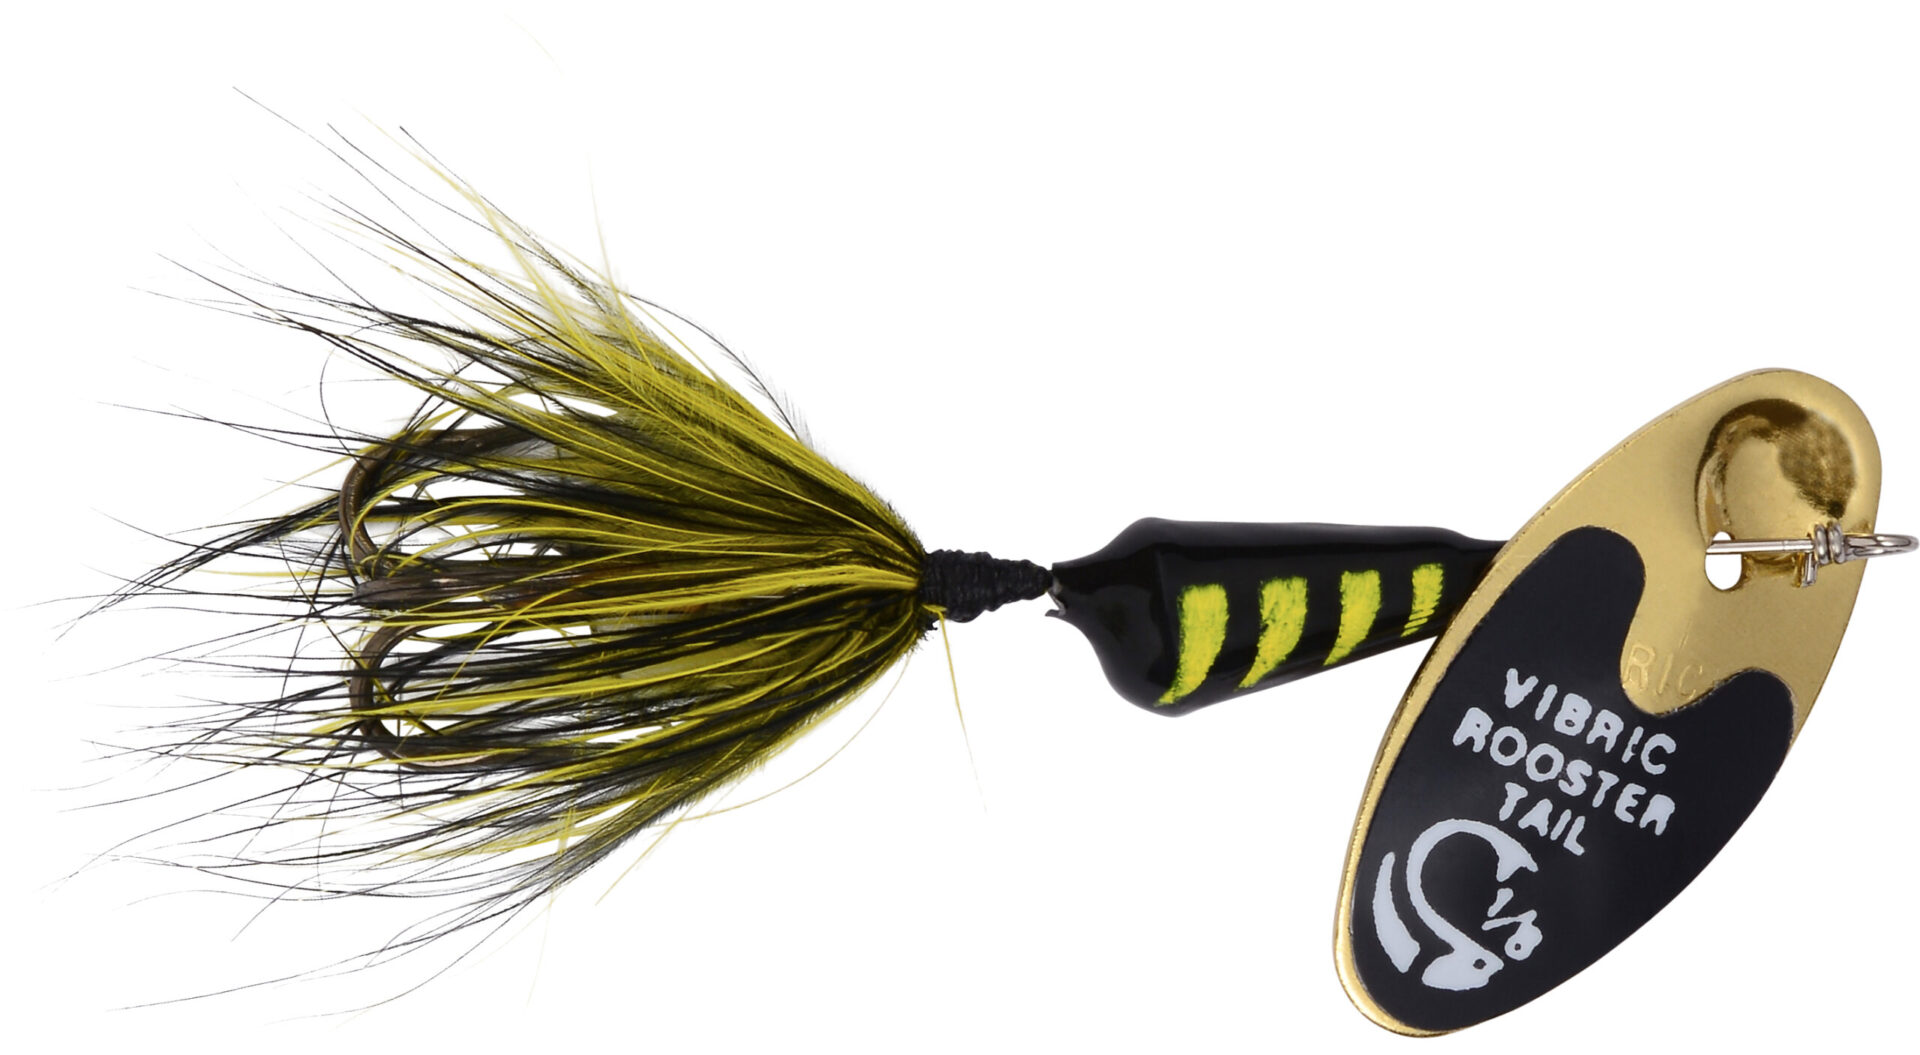 https://www.yakimabait.com/wp-content/uploads/2014/12/products-VIBRIC-ROOSTER-TAIL-BYTM-scaled.jpg